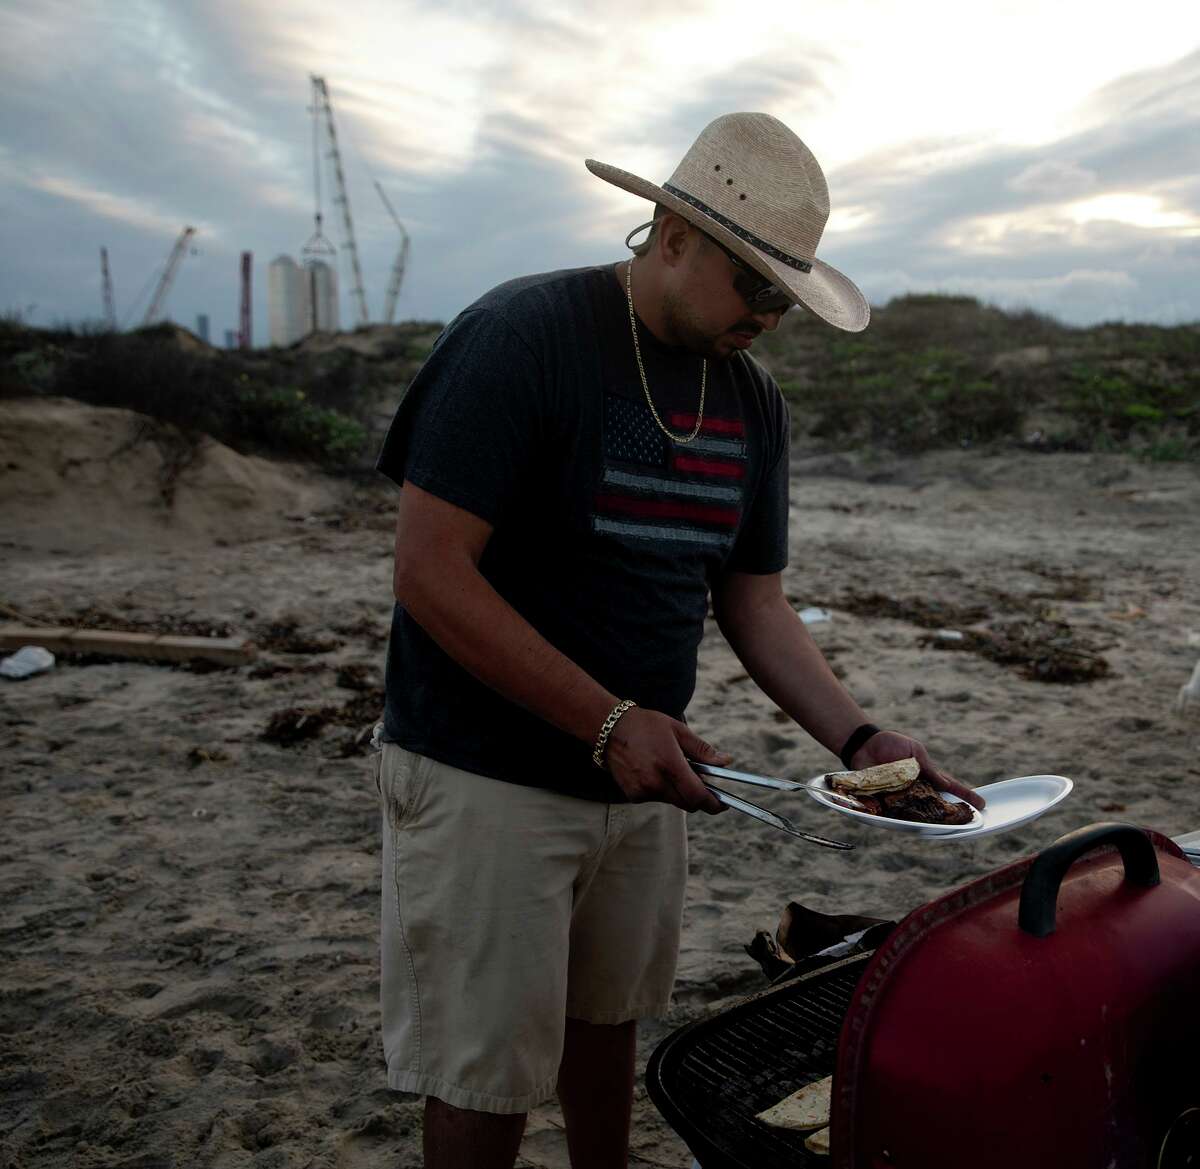 Jesus Chavez plates his food while his daughter Brianna Chavez wander behind him. The family came to Boca Chica beach to celebrate BriannaÕs 16th birthday. They were forced to wait on Highway 4, the only way into the beach, because SpaceX was moving equipment. Road closures from the space facility are common.